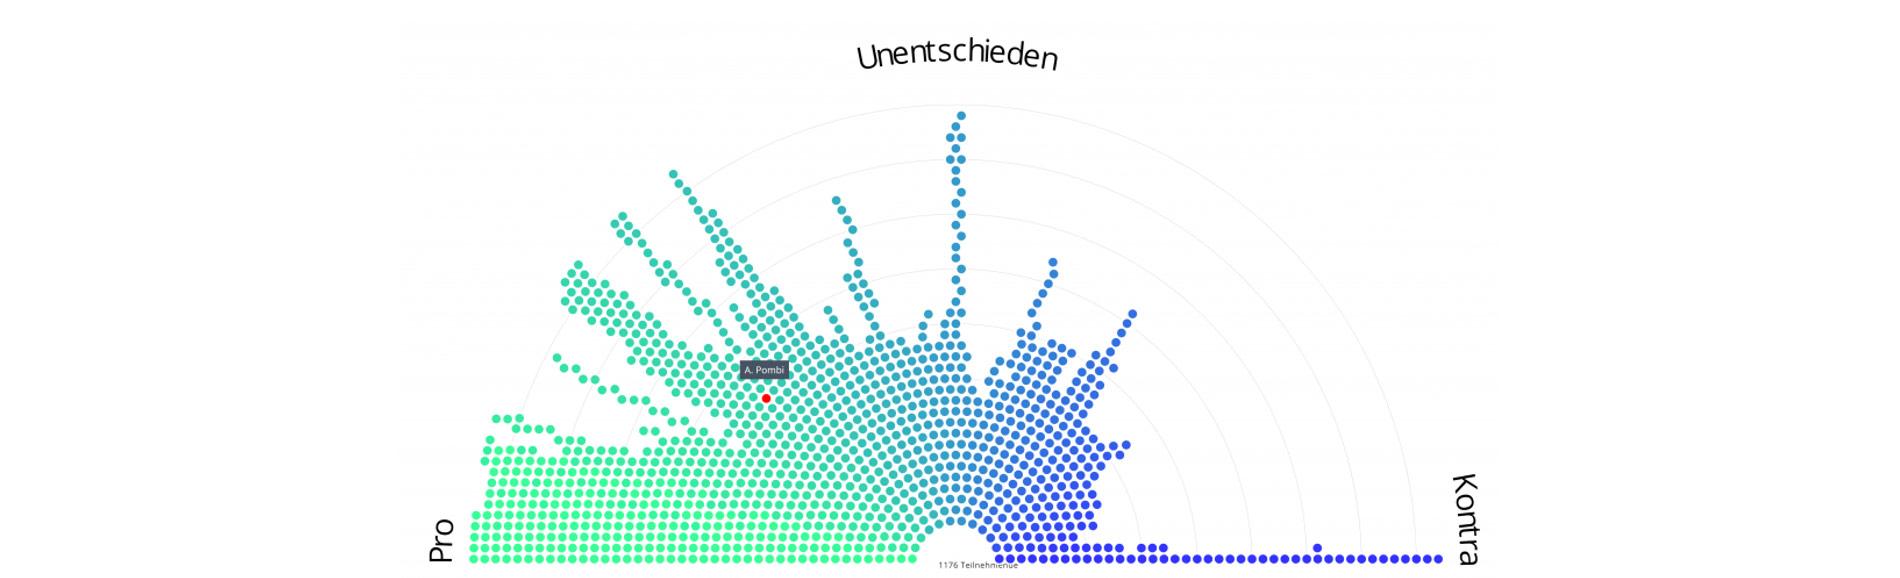 Figure 1: Positioning of participants on the proposal. Source: Demokratiefabrik 